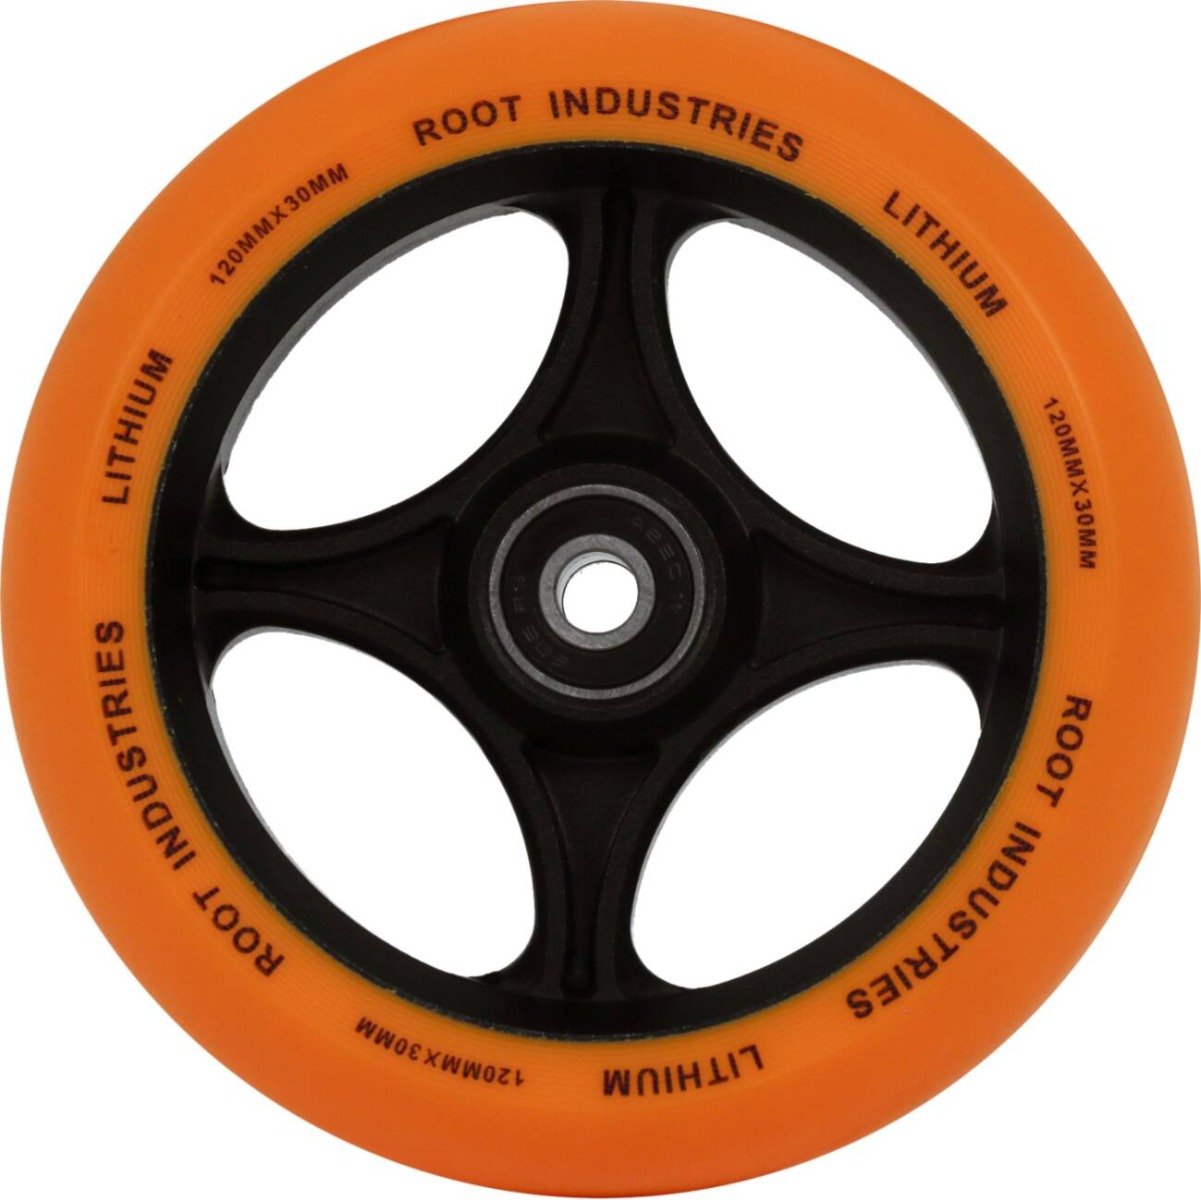 An image of Root Industries Lithium 120mm Scooter Wheel - Orange